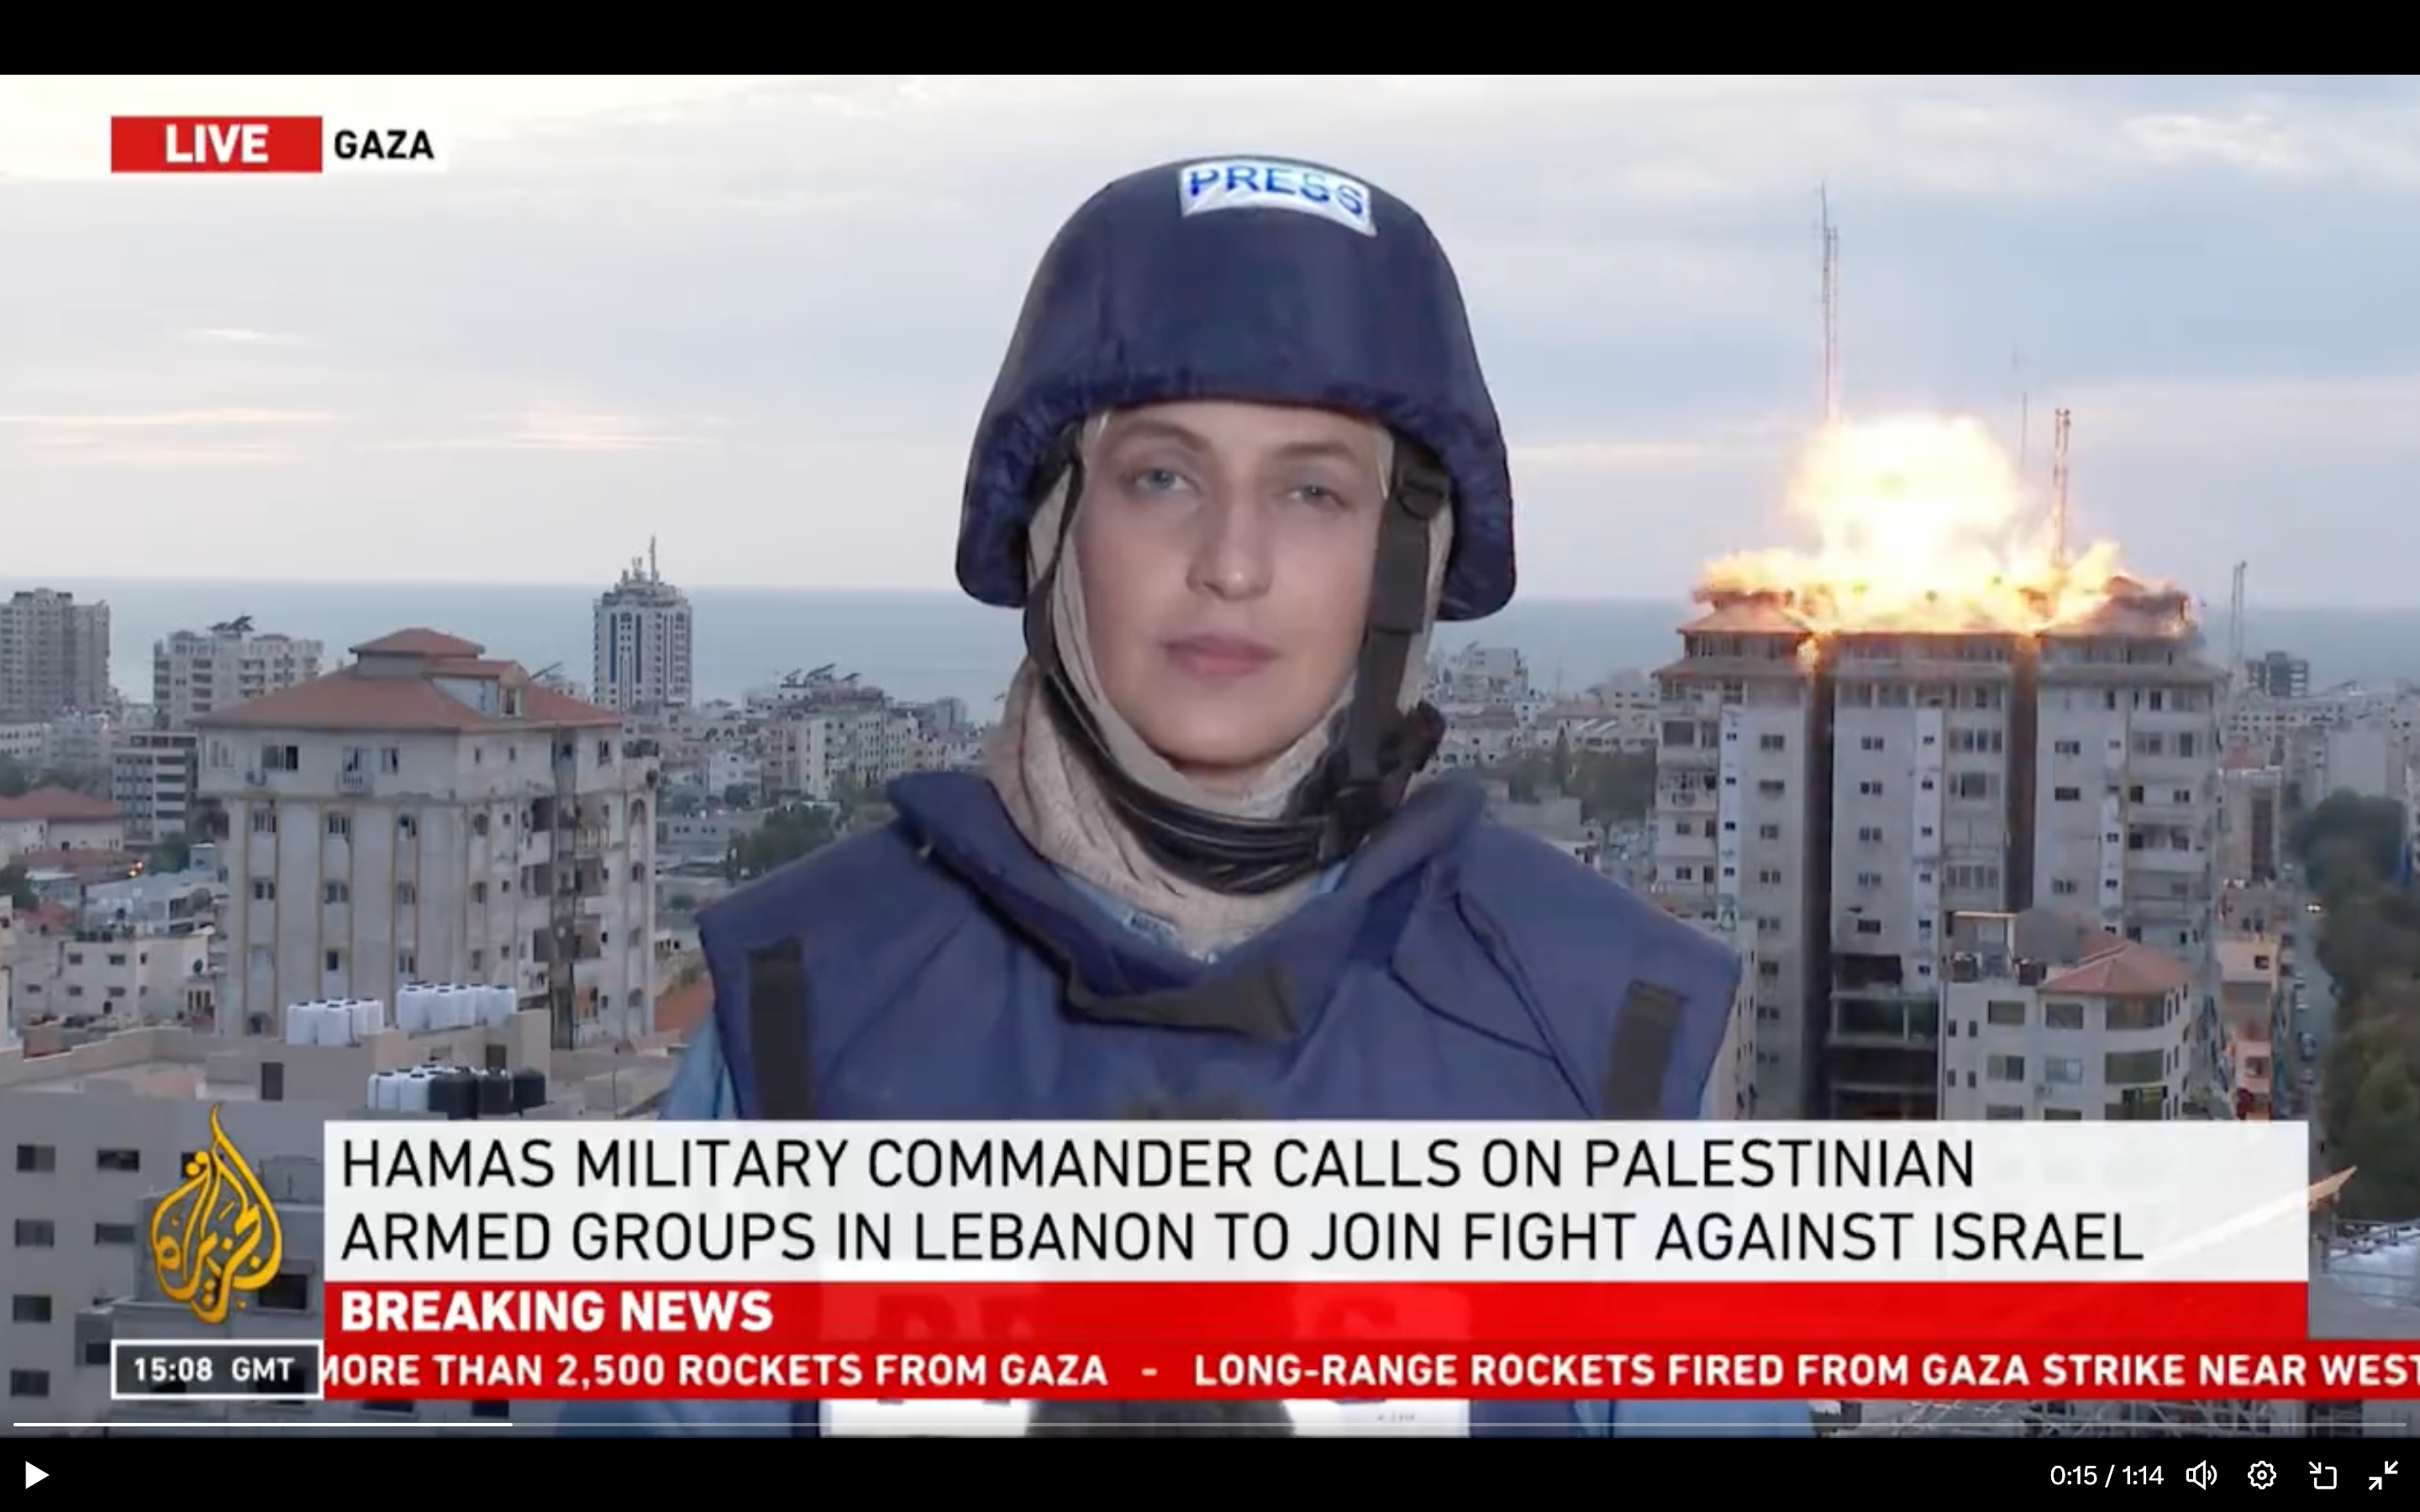 Dramatic moment a missile strikes behind a reporter in Gaza